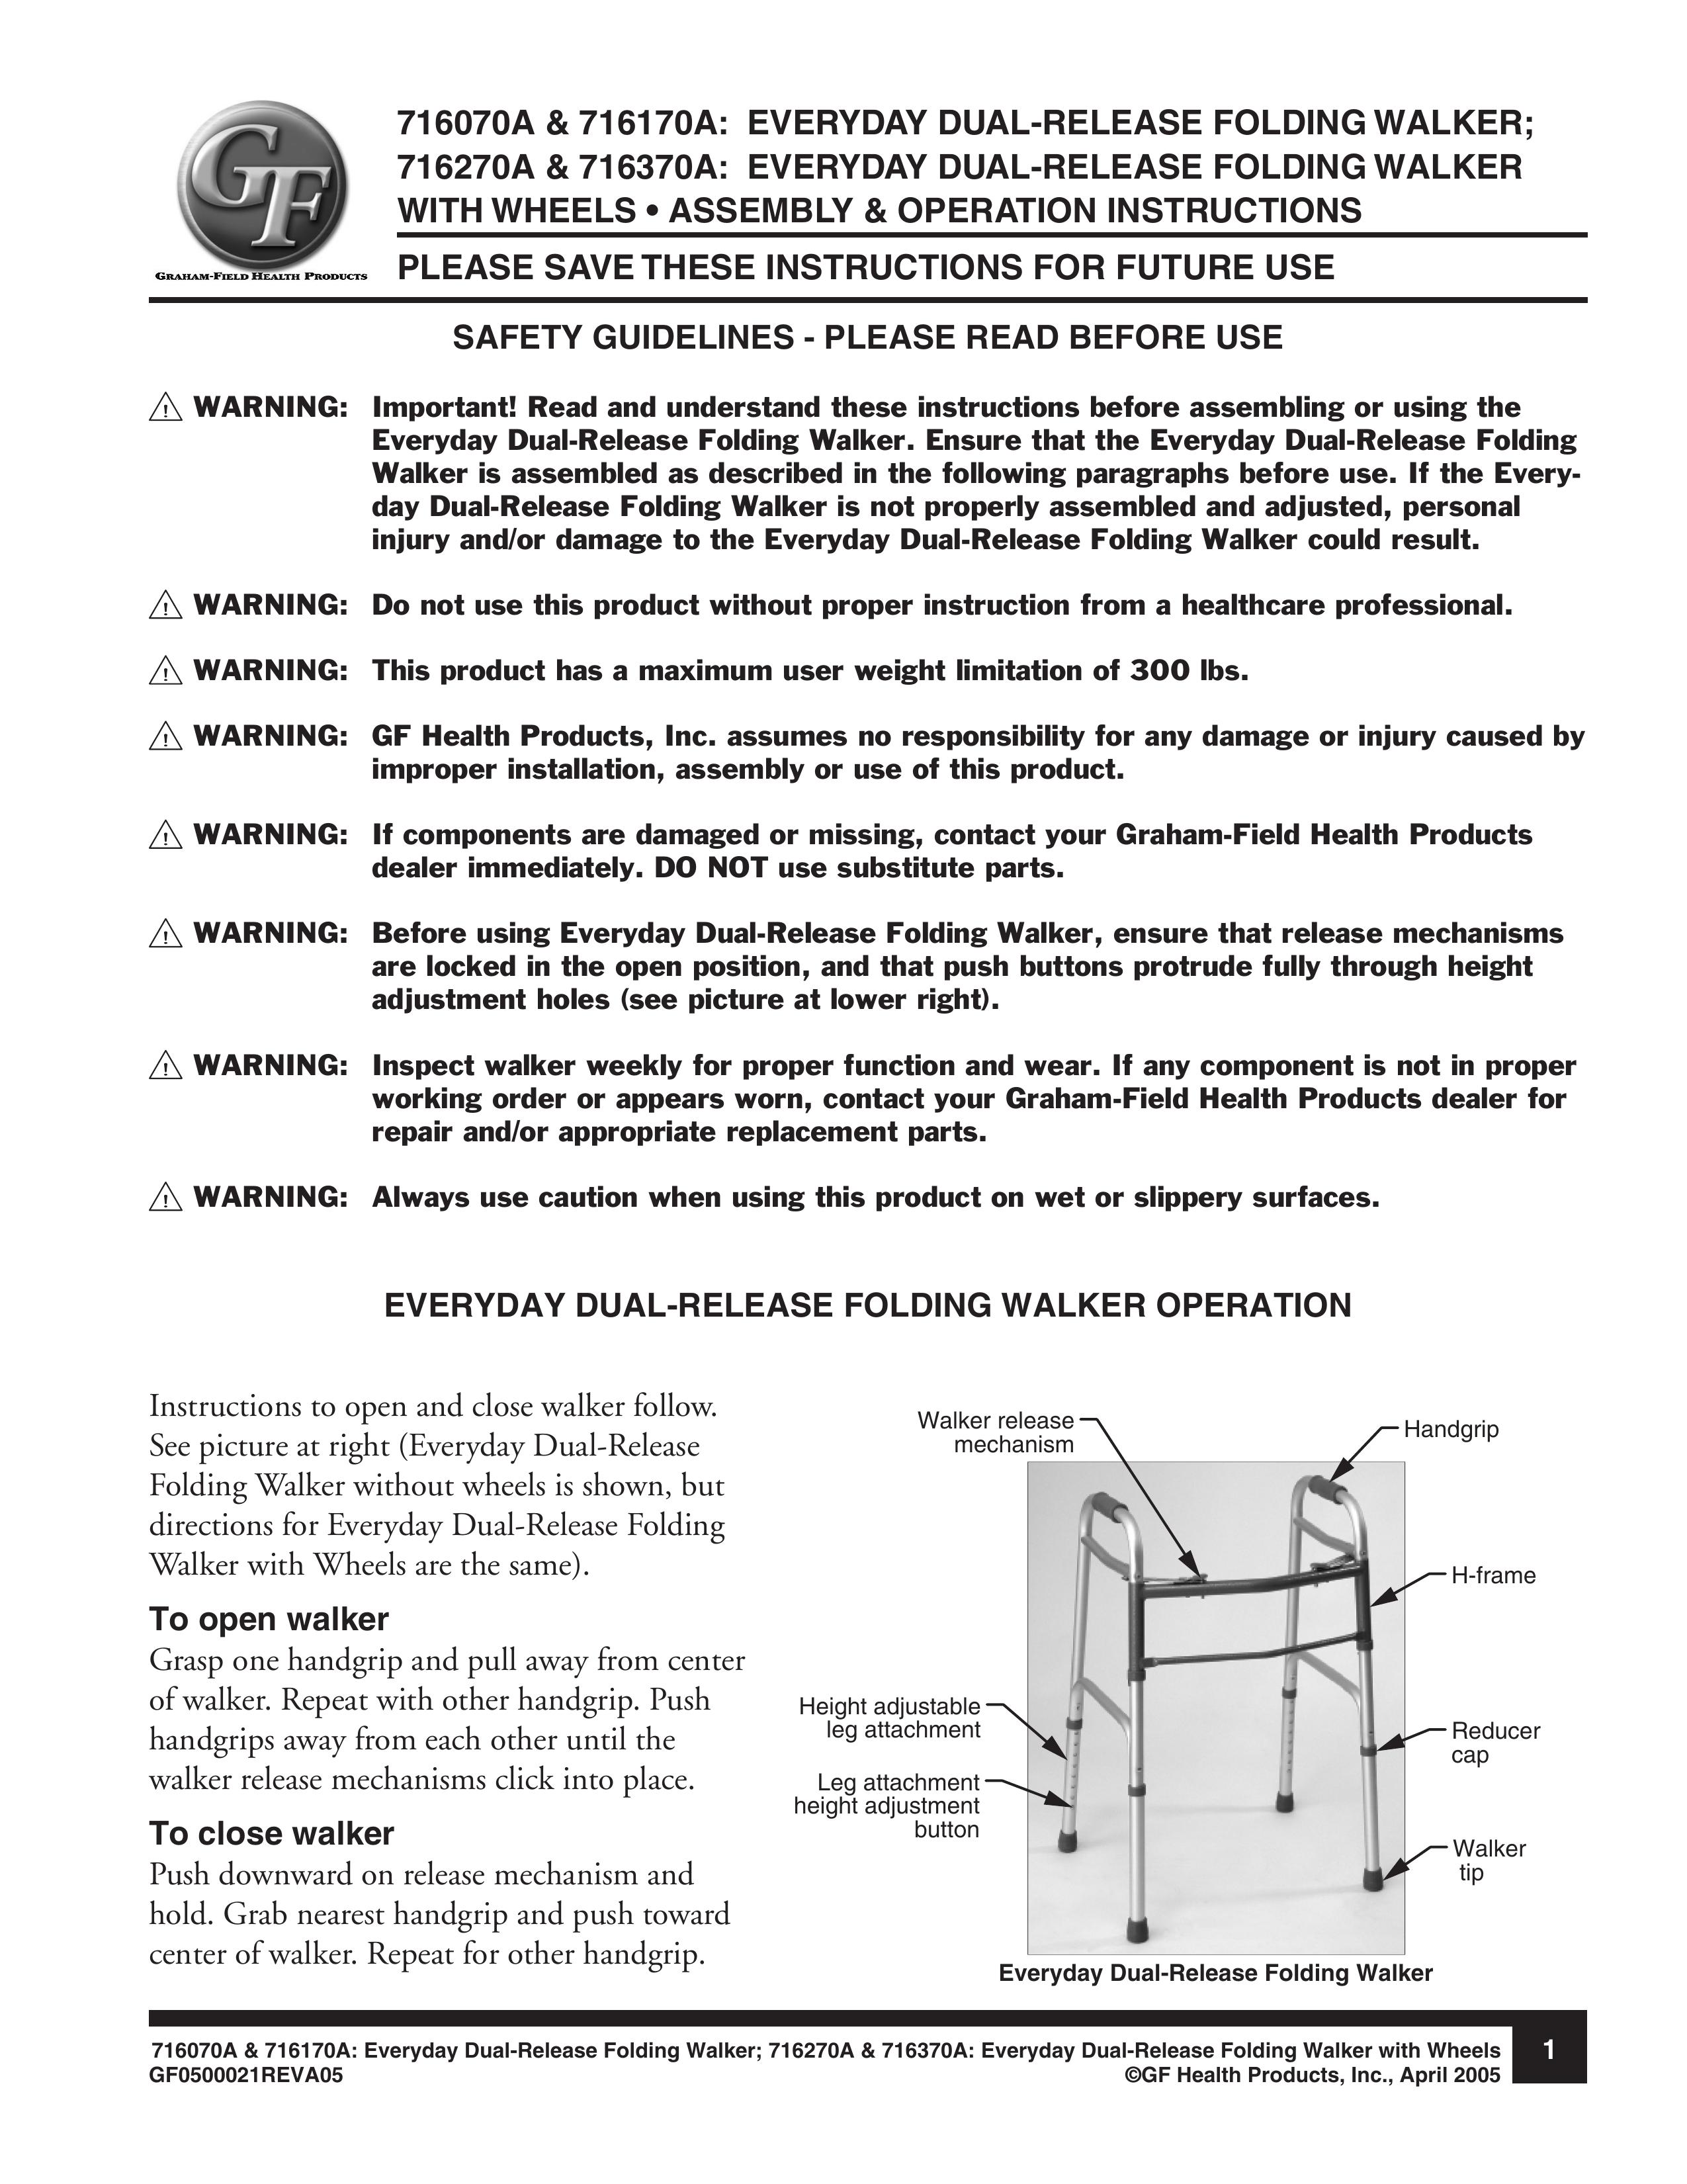 Graham Field 716170A Mobility Aid User Manual